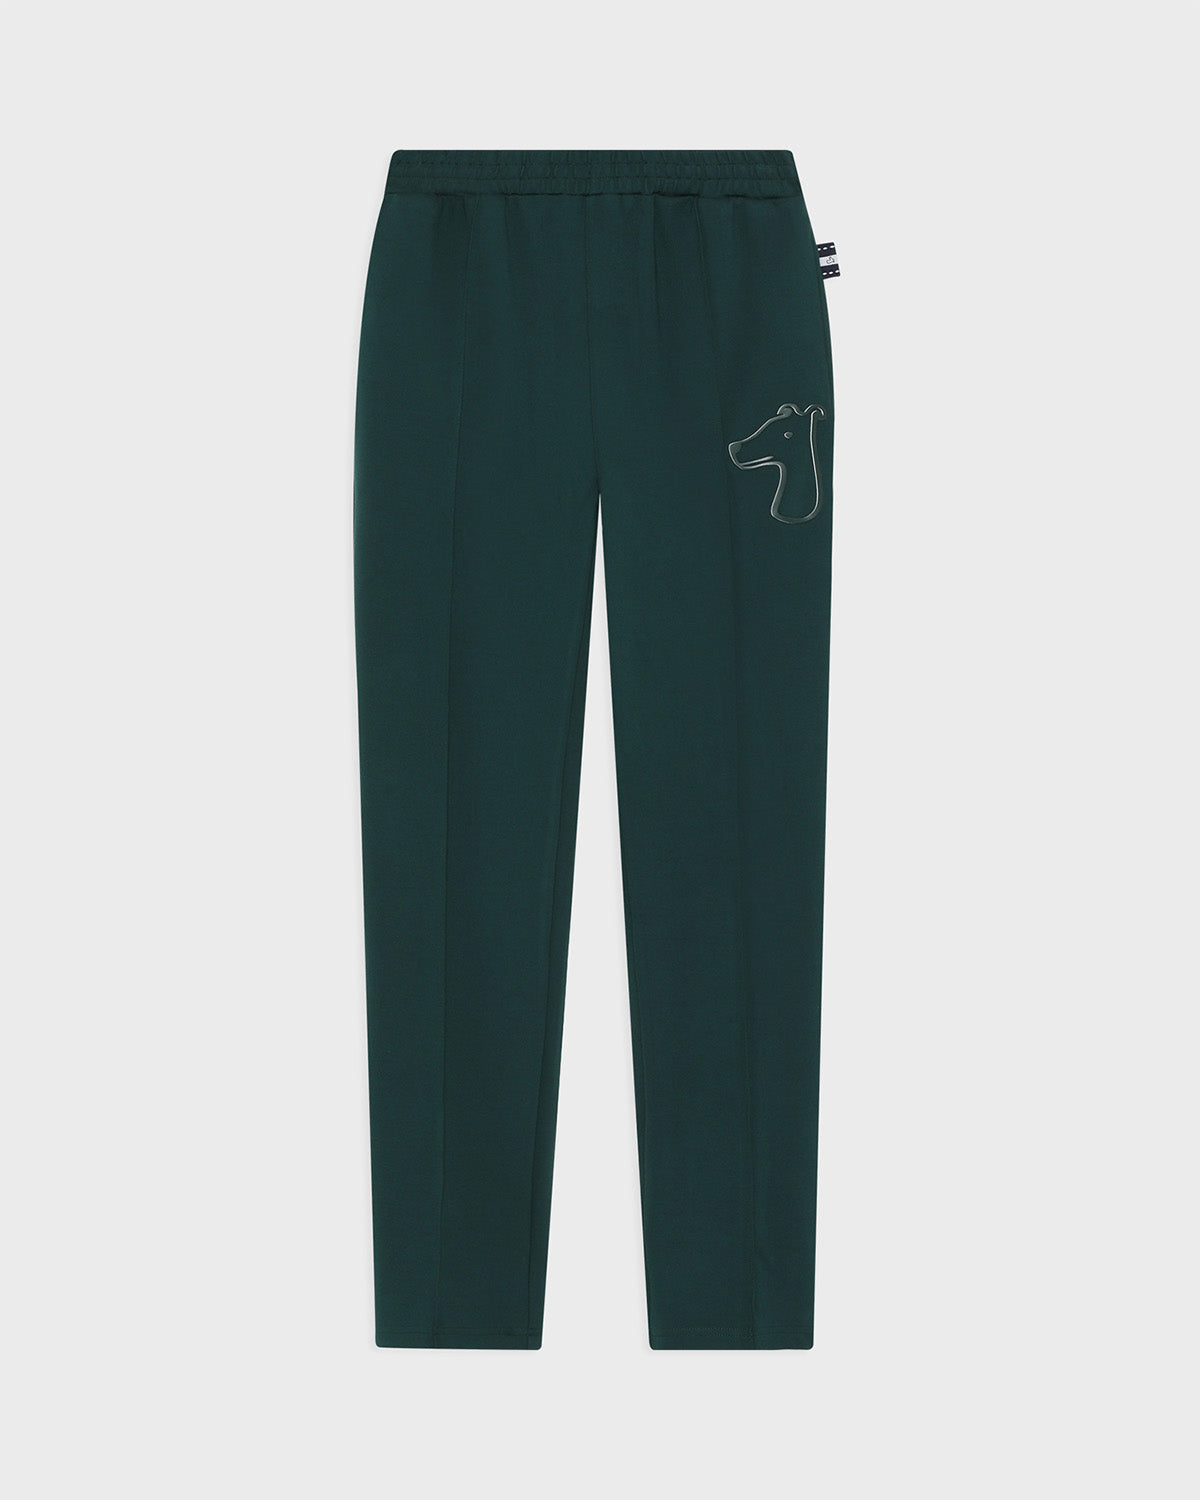 SMILEYHOUND TRACK PANTS WITH BOLD LOGO